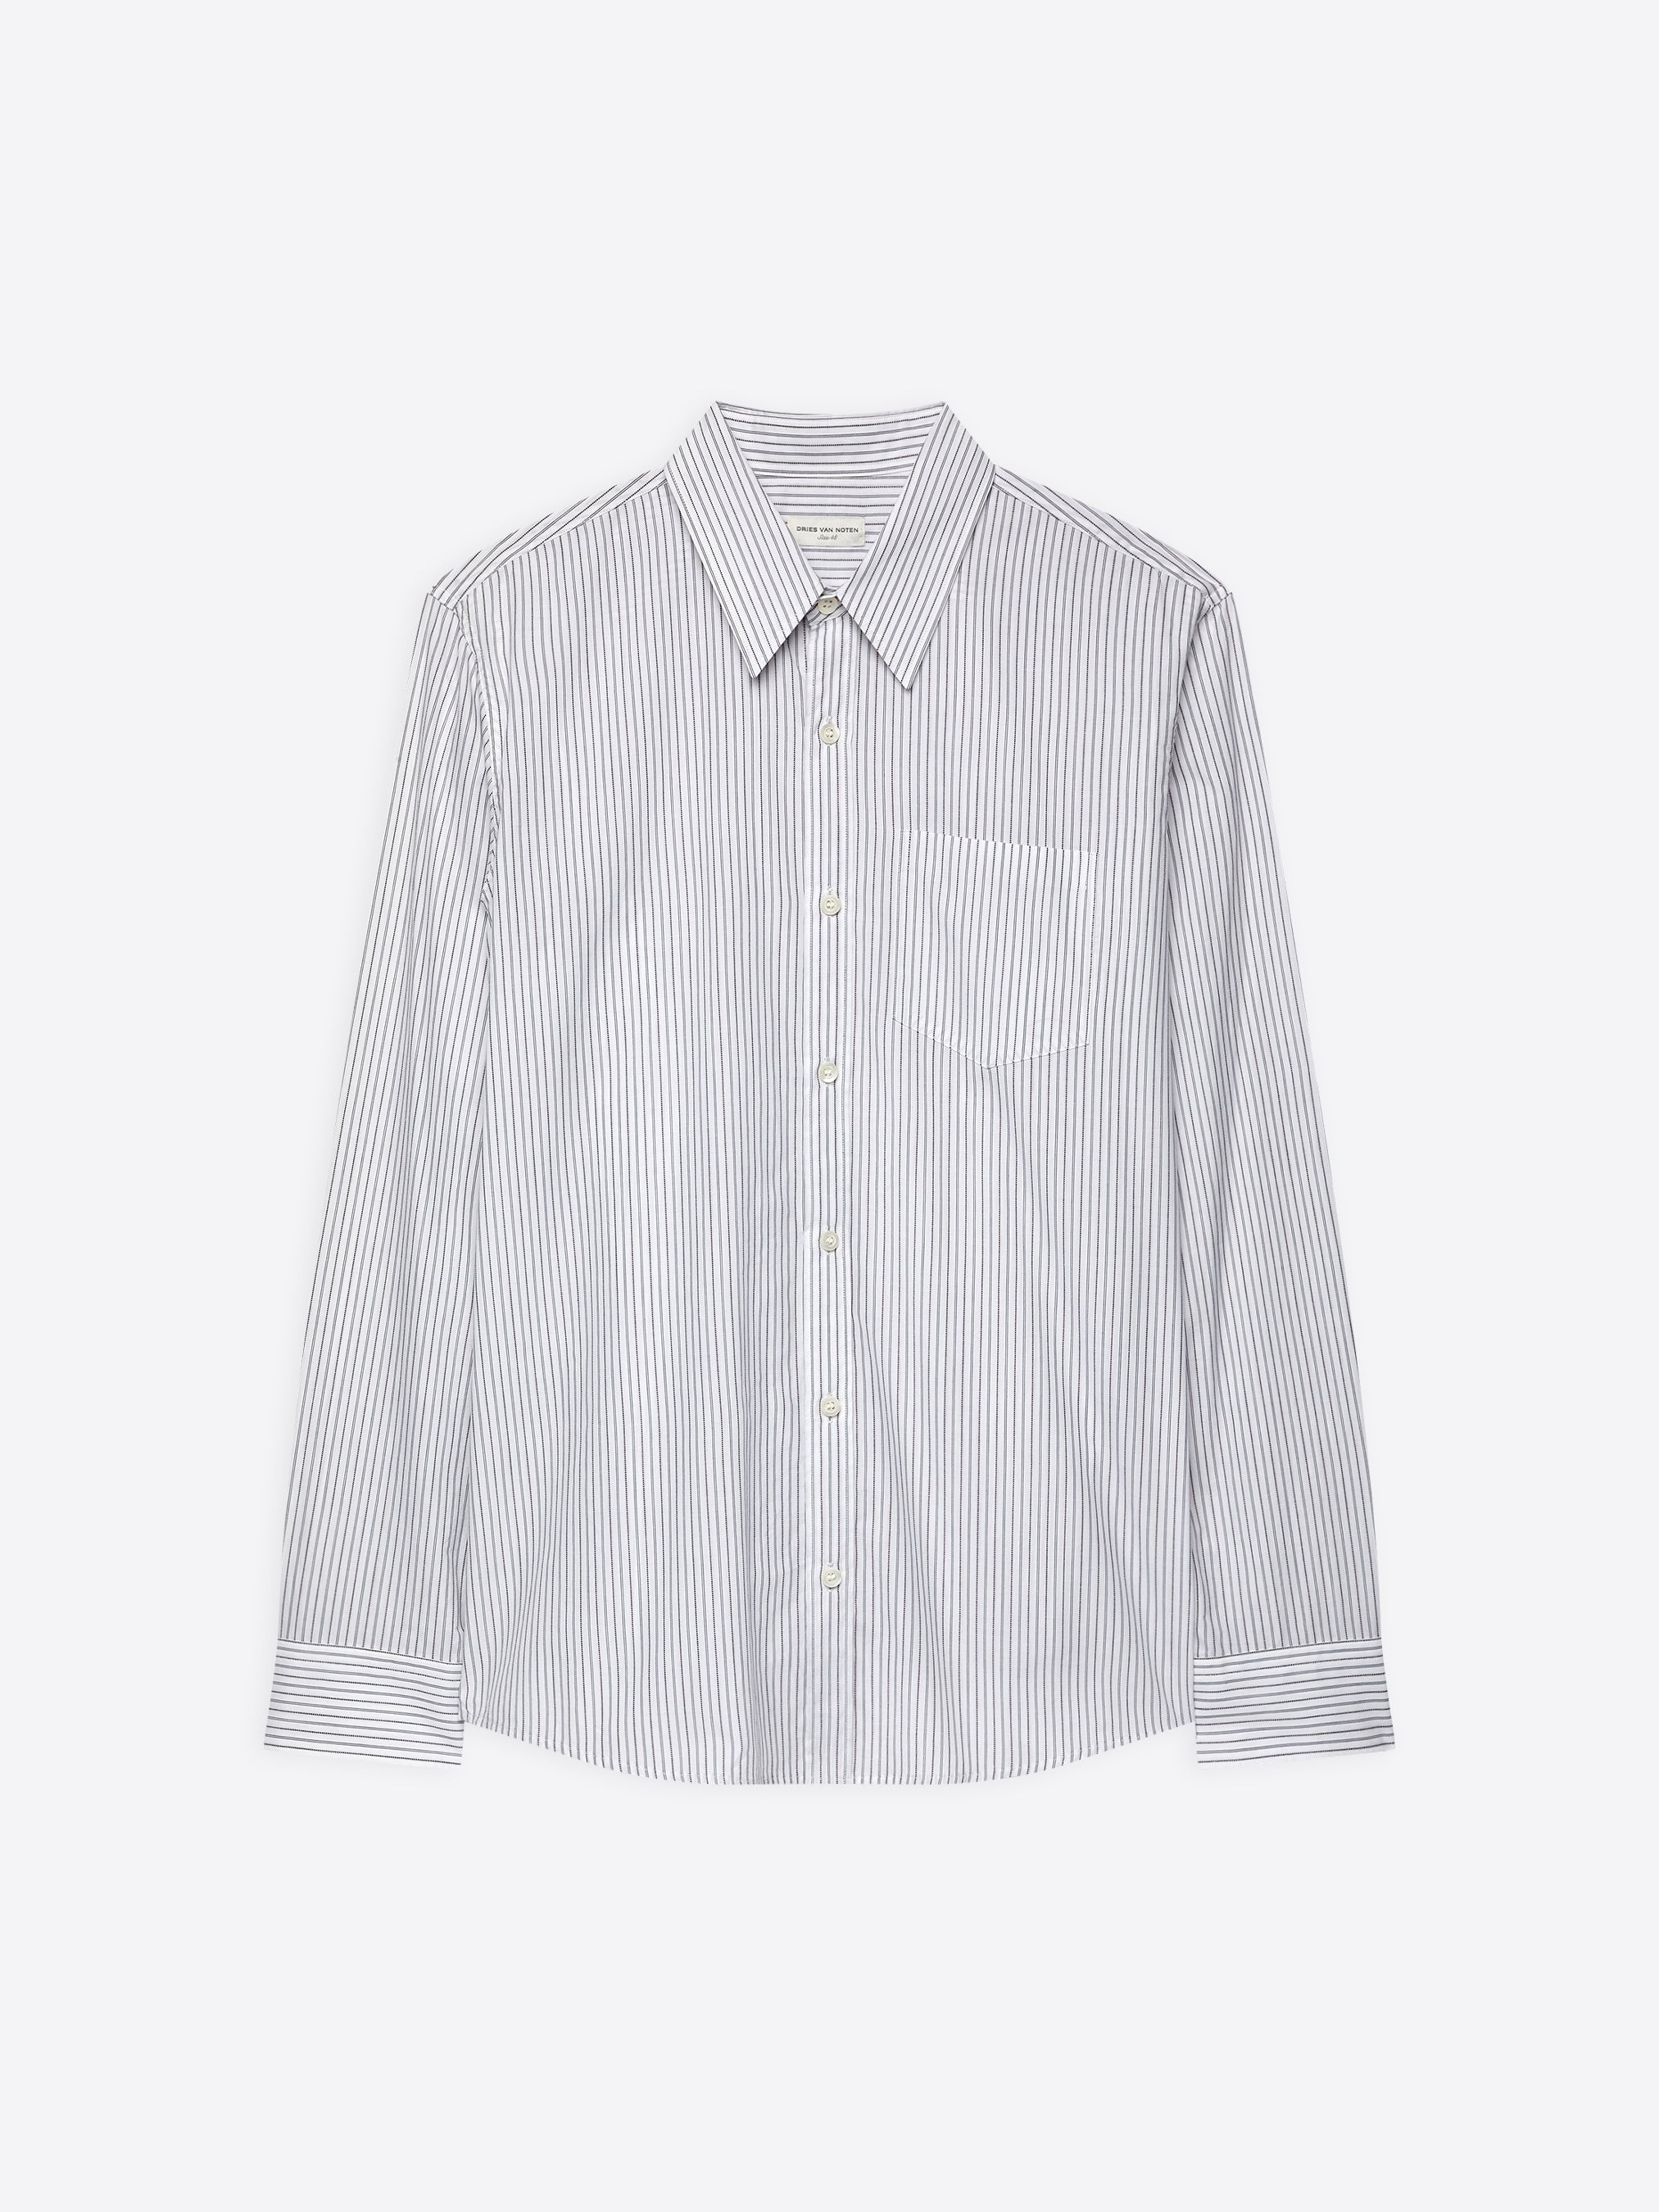 FITTED COTTON SHIRT - 1